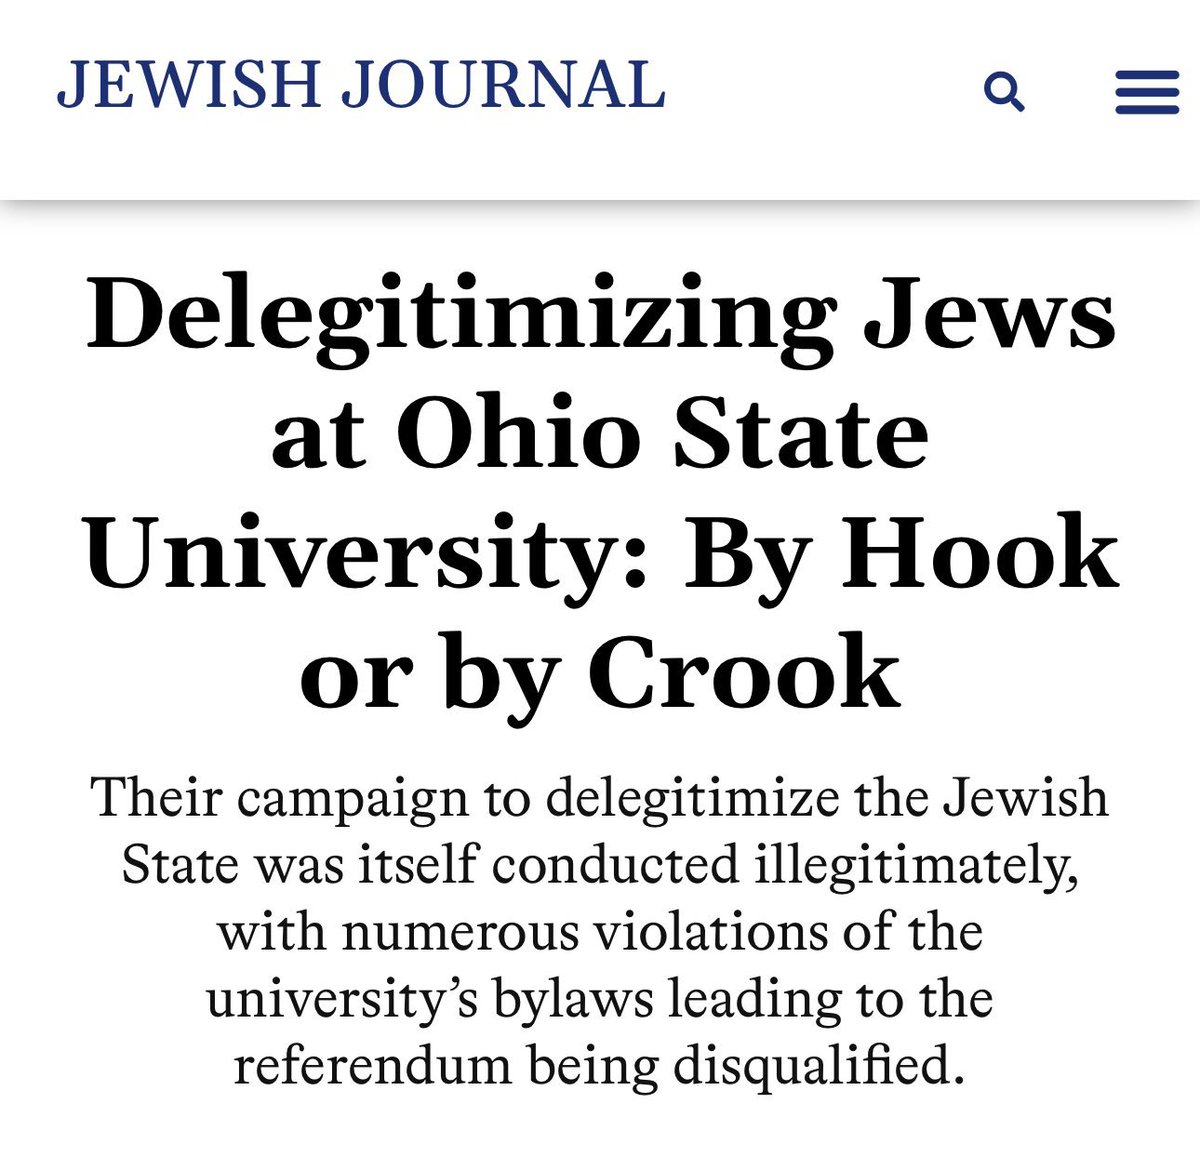 BREAKING: @OhioState just canceled its antisemitic BDS vote following SJP’s numerous campaign violations. jewishjournal.com/commentary/opi…